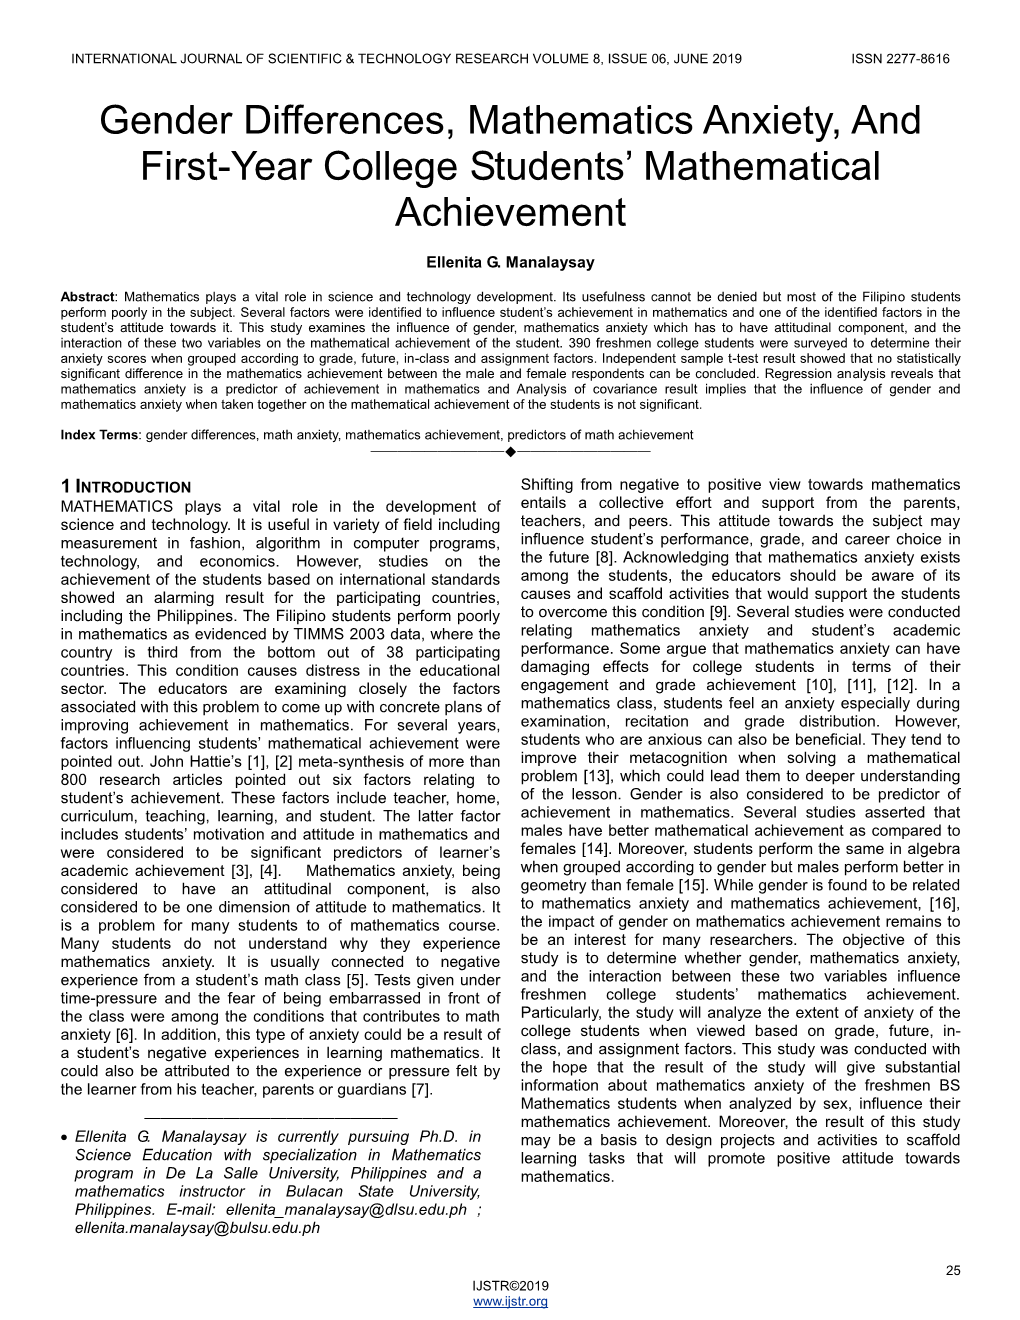 Gender Differences, Mathematics Anxiety, and First-Year College Students’ Mathematical Achievement